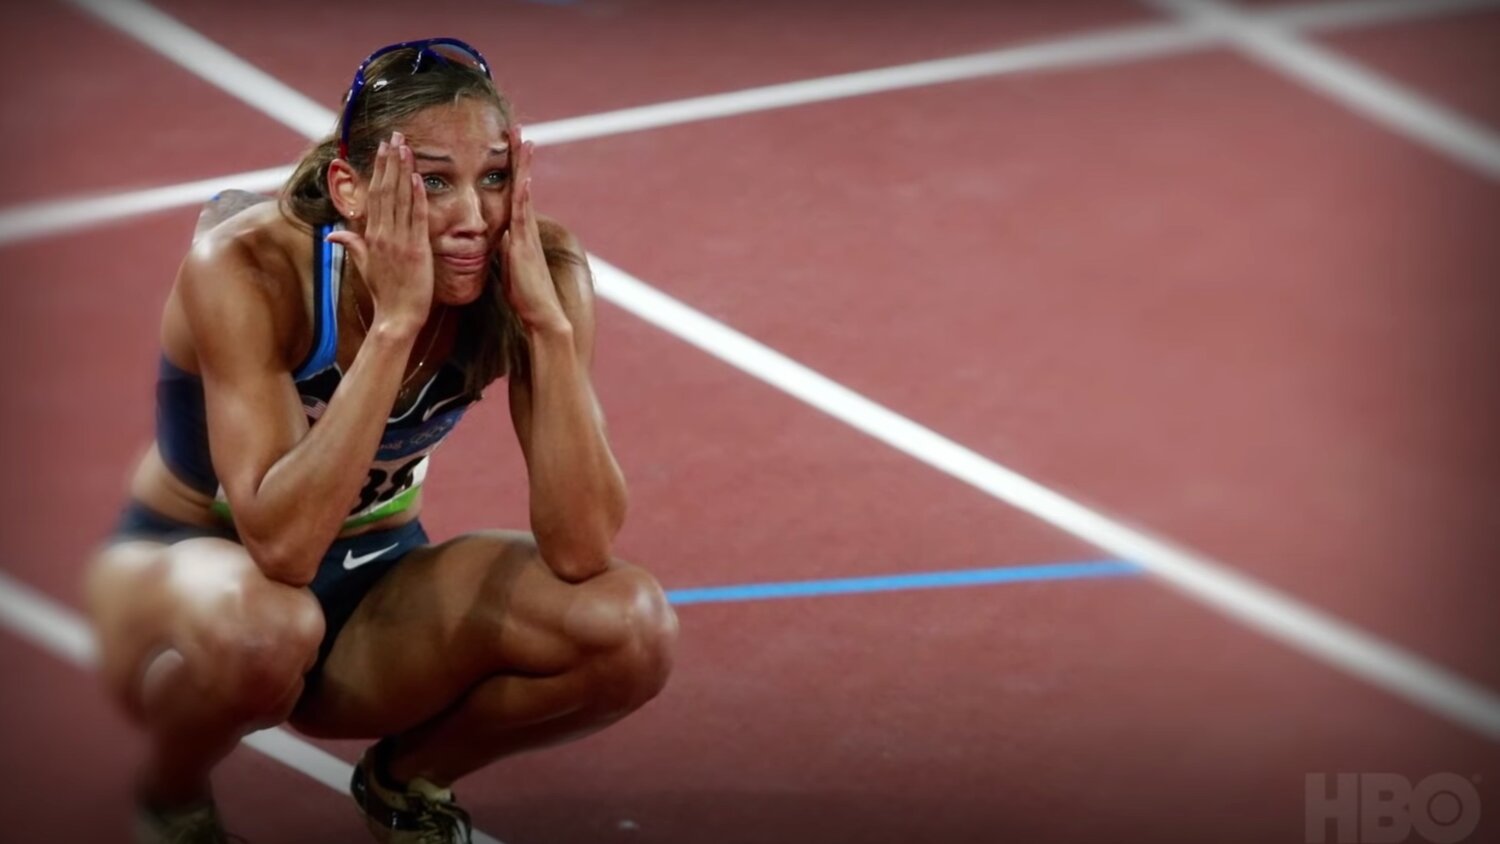 Olympic Athletes, Depression, The Weight of Gold, Running